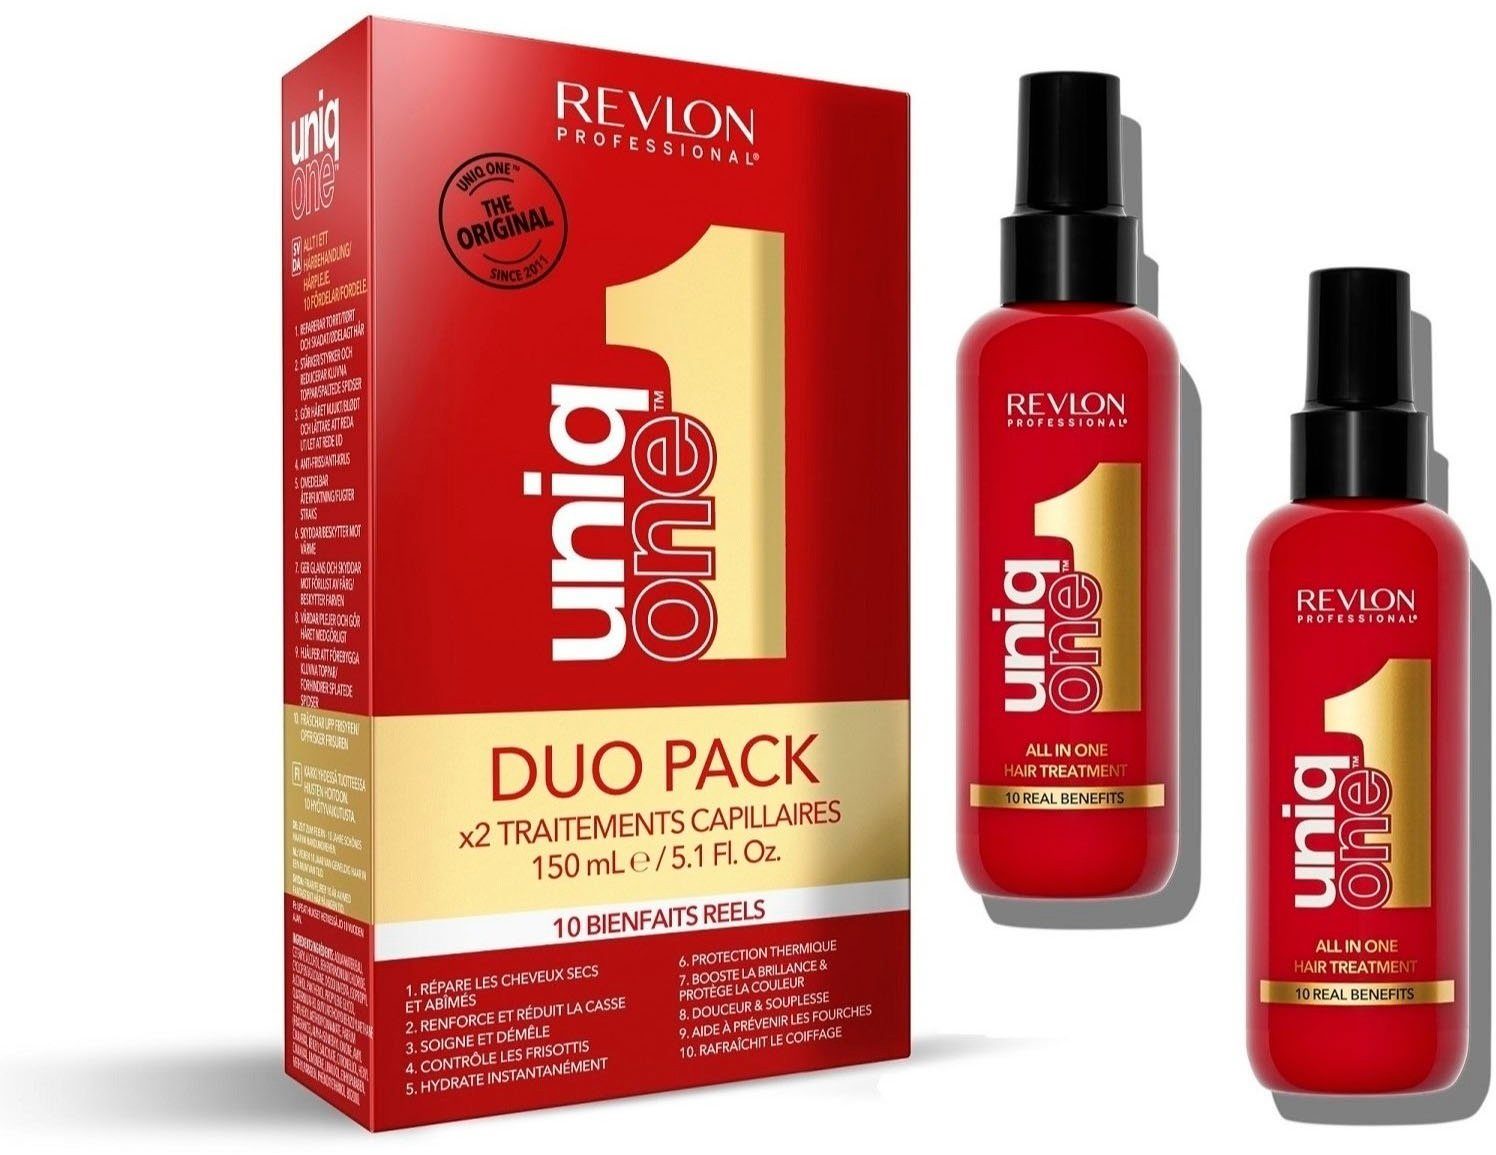 Leave-in REVLON All Spar-Set, In Haarpflege-Set Set, One Duopack Limited 2-tlg., Uniqone Classic Edition PROFESSIONAL Hair Pflege Treatment